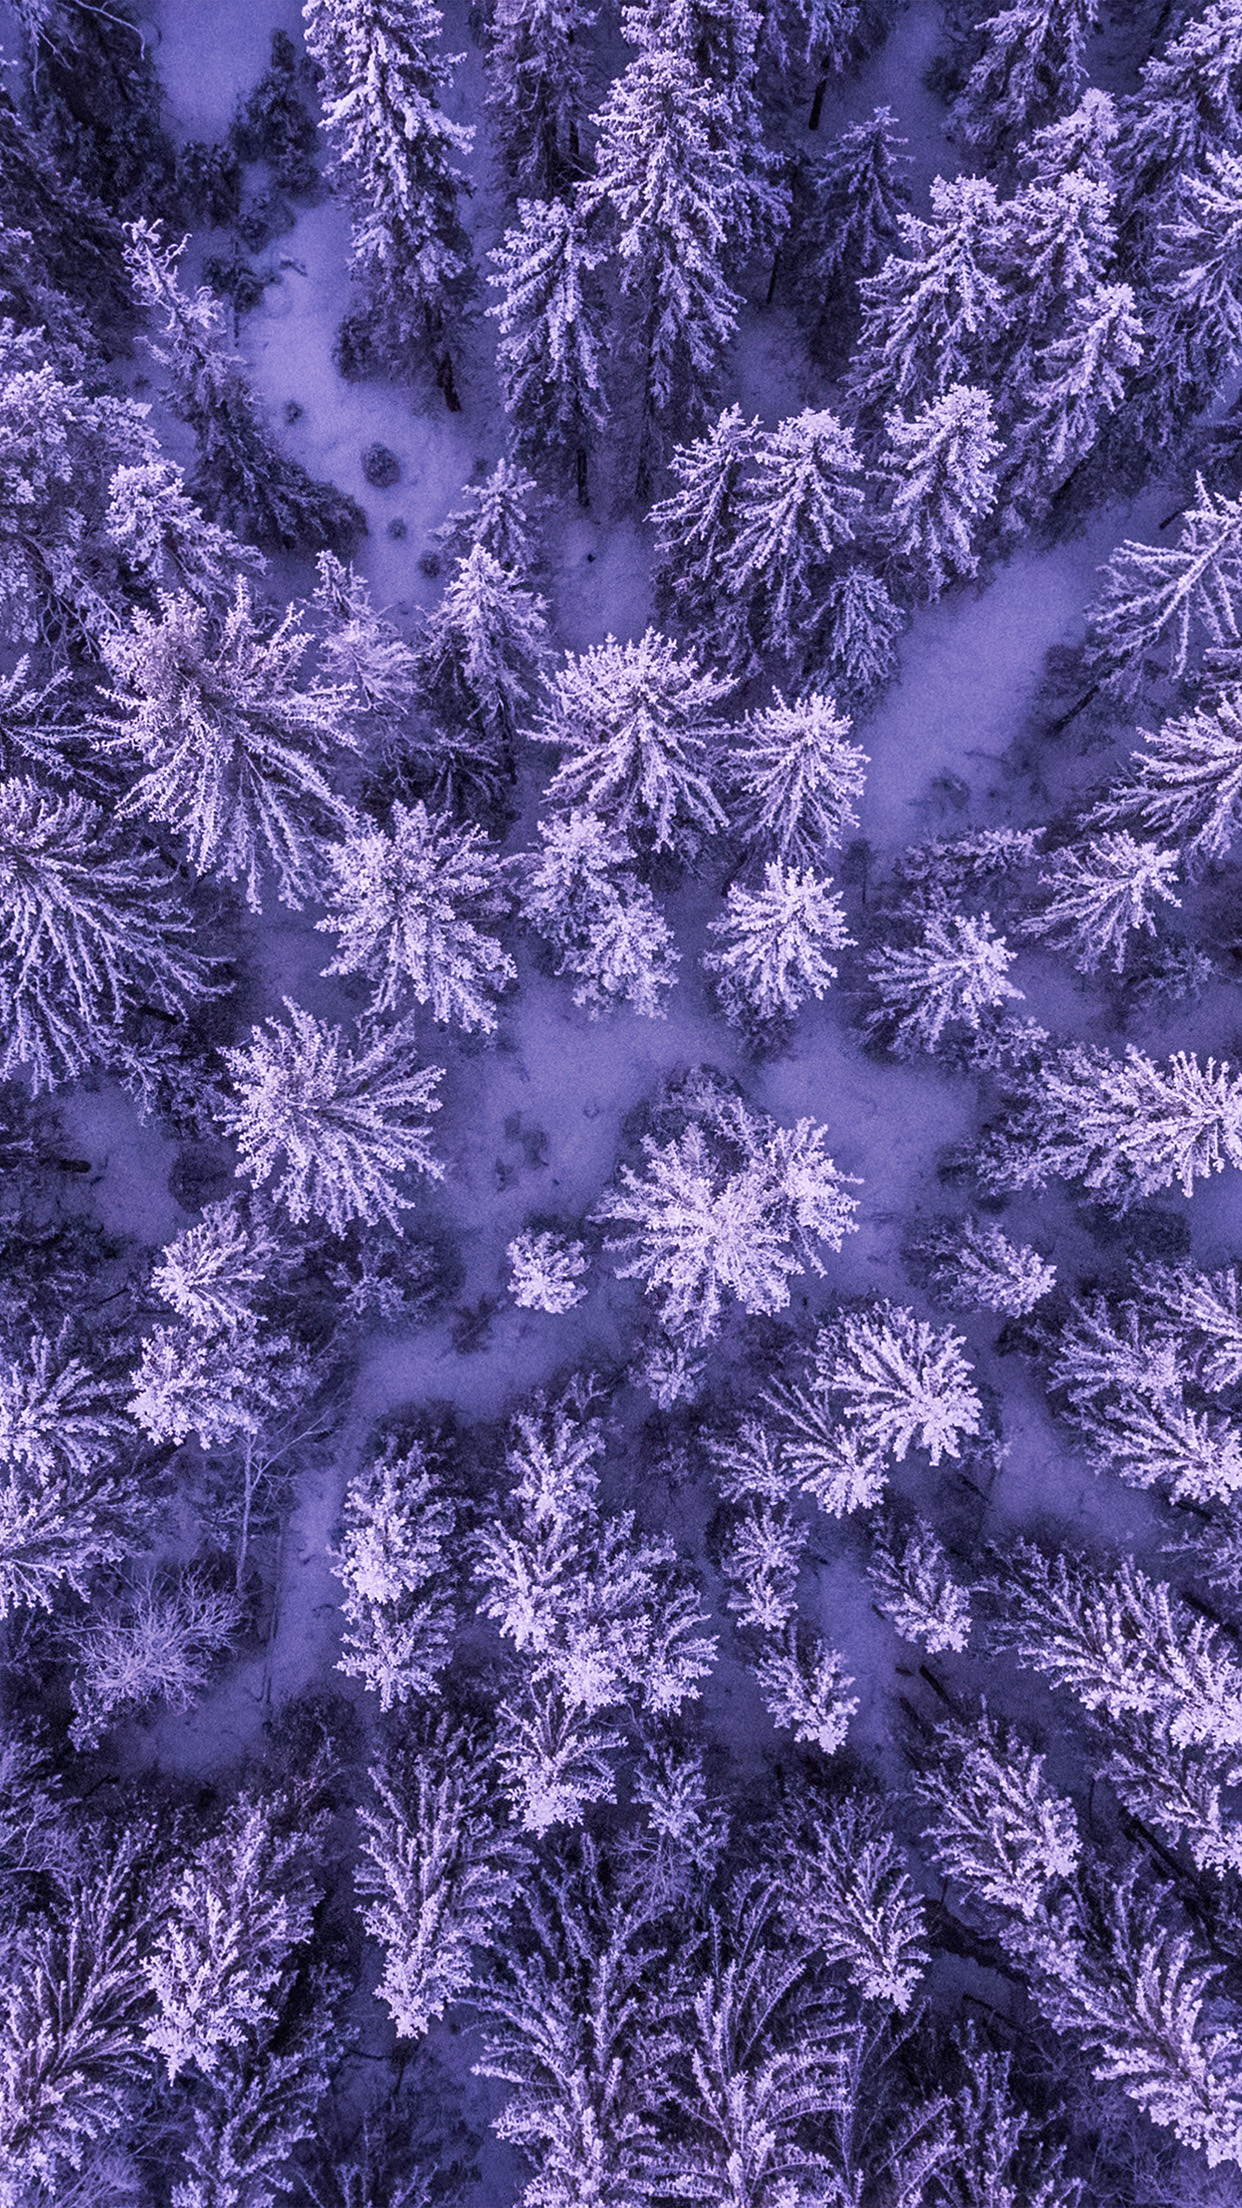 iPhone X wallpaper. mountain forest wood purple nature